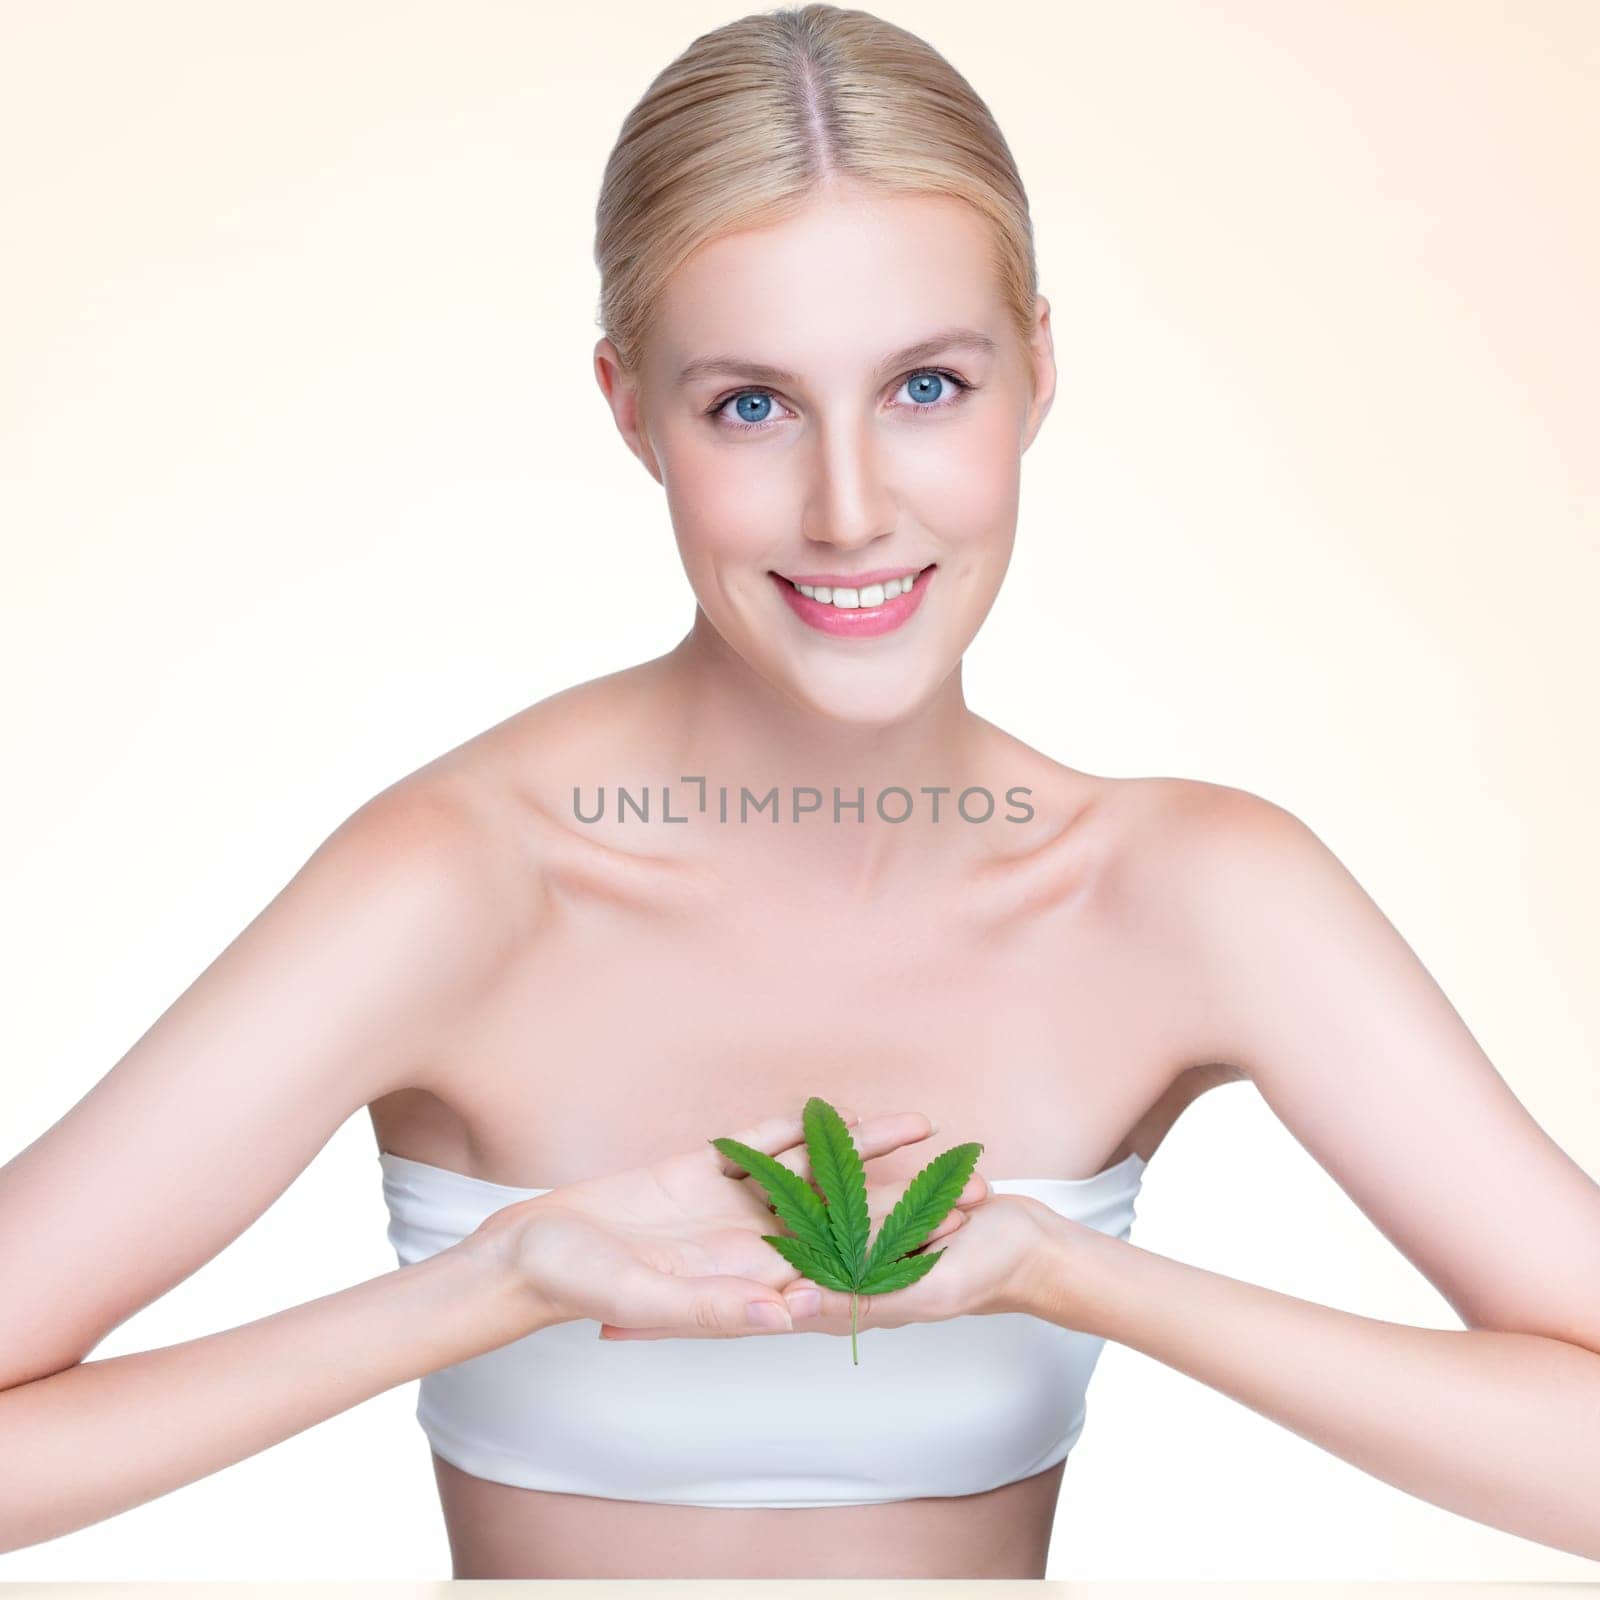 Personable woman hold green leaf as cannabis beauty concept. by biancoblue